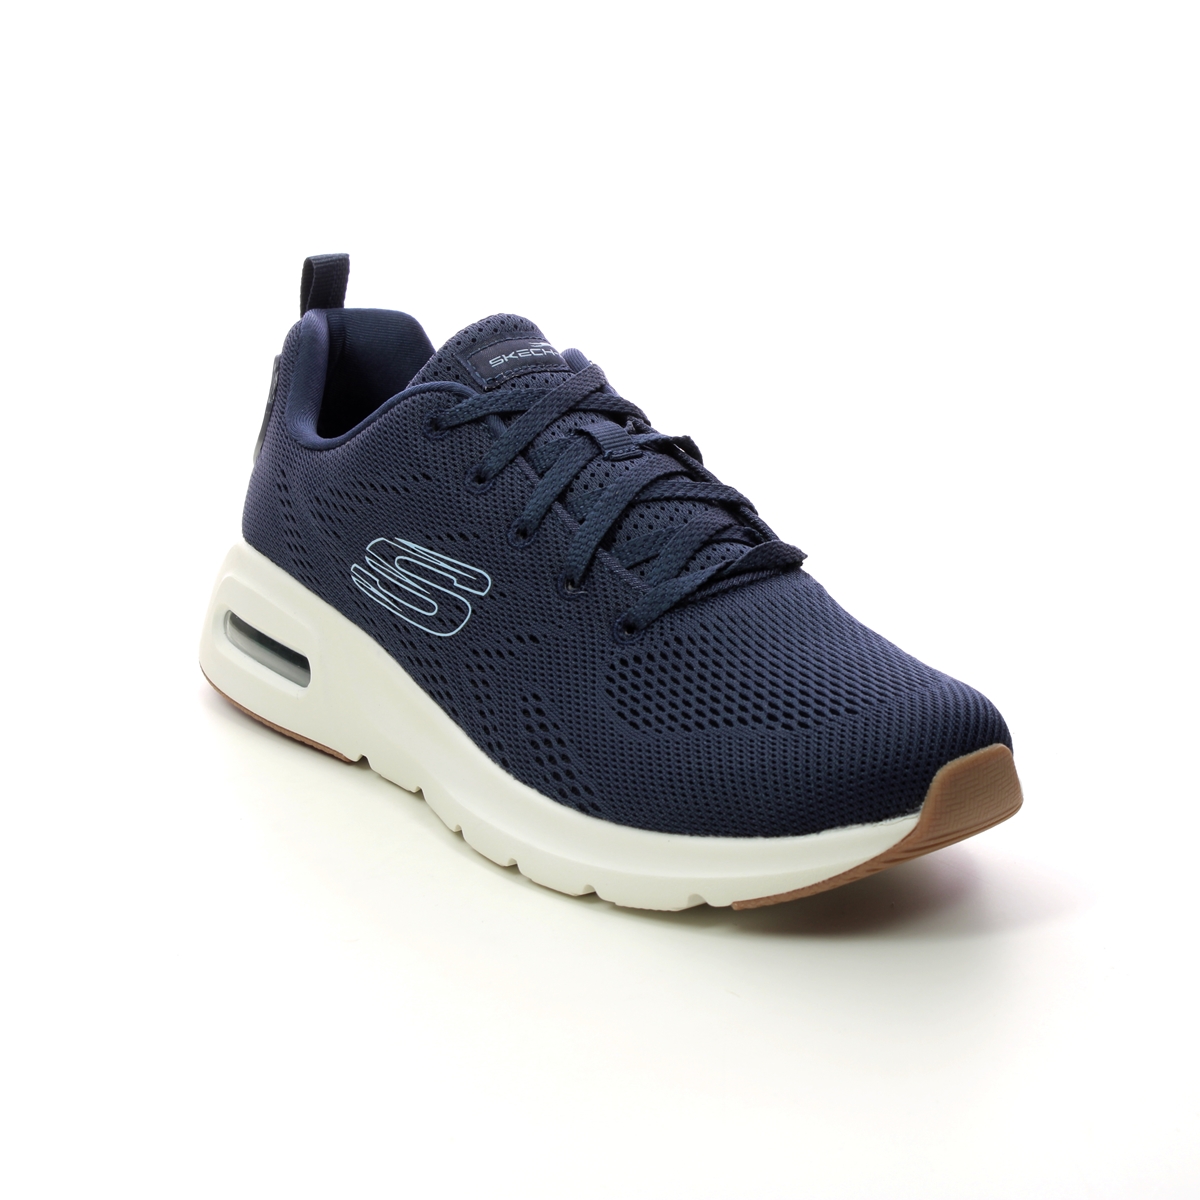 Skechers Skech Air Court NVY Navy Womens trainers 149948 in a Plain Textile in Size 4